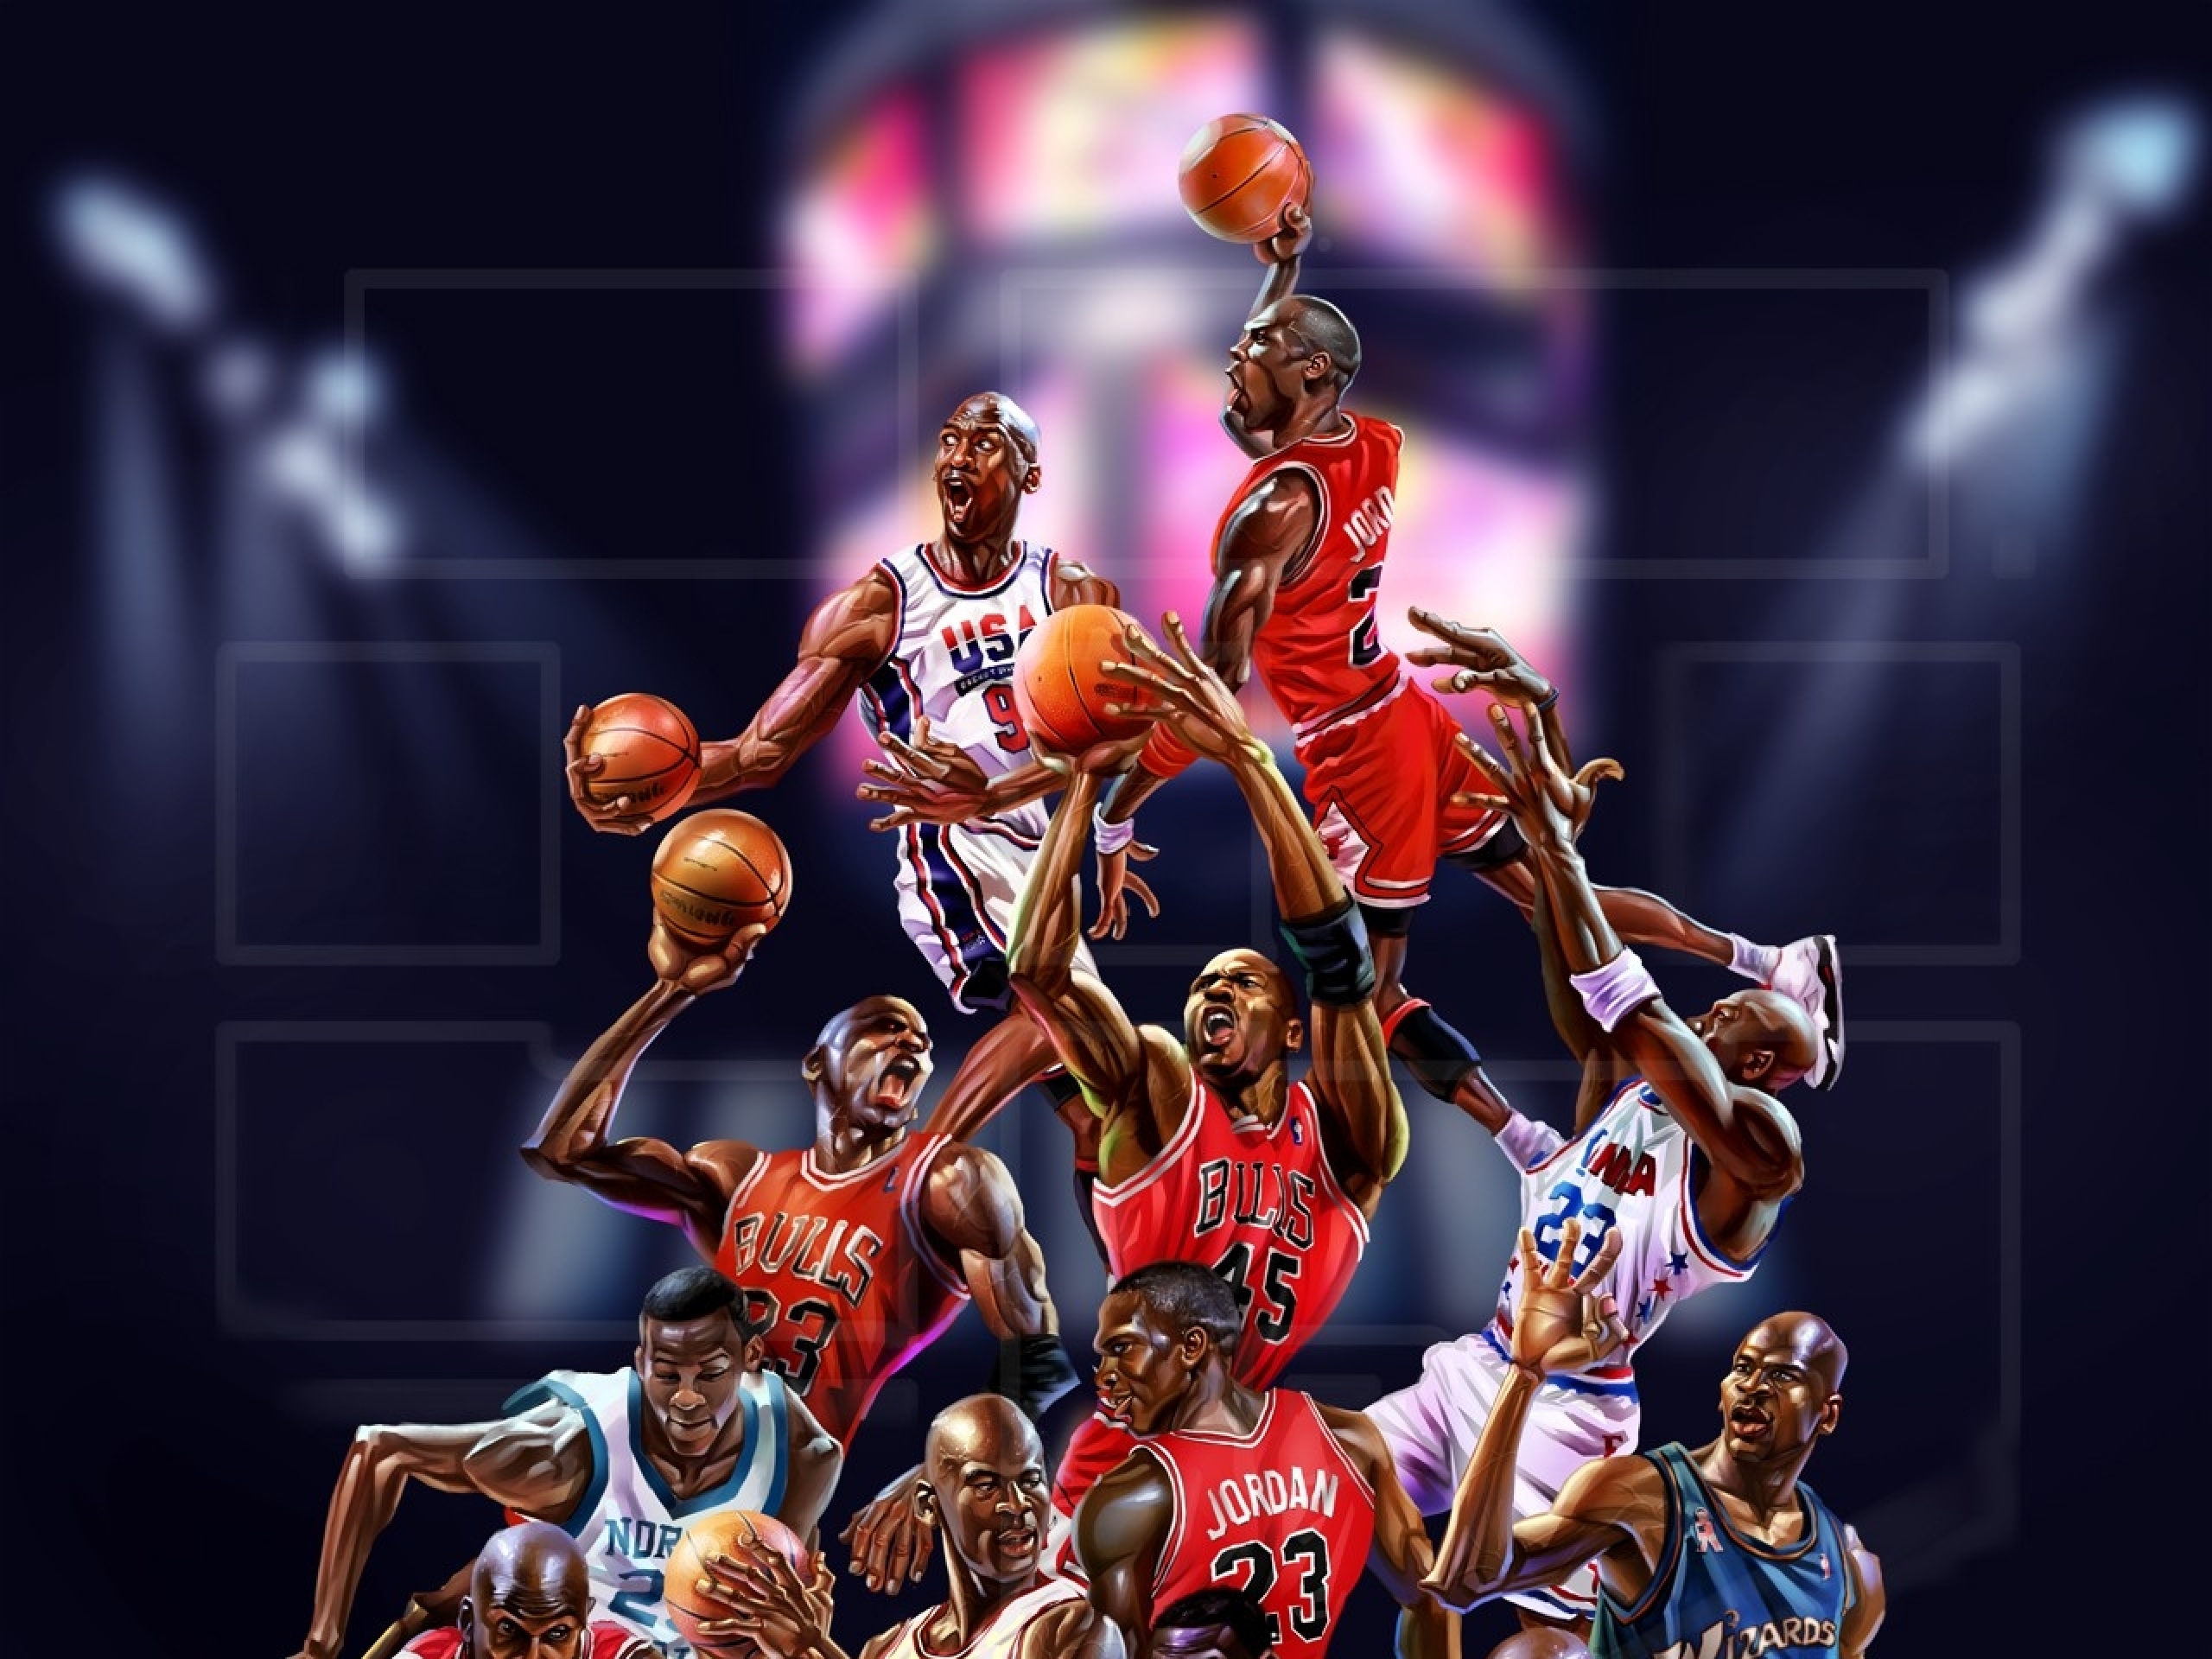 Free download on September 17 2015 By Stephen Comments Off on NBA 2015 Wallpaper [2560x1920] for your Desktop, Mobile & Tablet. Explore NBA Wallpaper 2015. NBA Wallpaper for Computer, NBA Live Wallpaper, NBA Finals 2015 Wallpaper